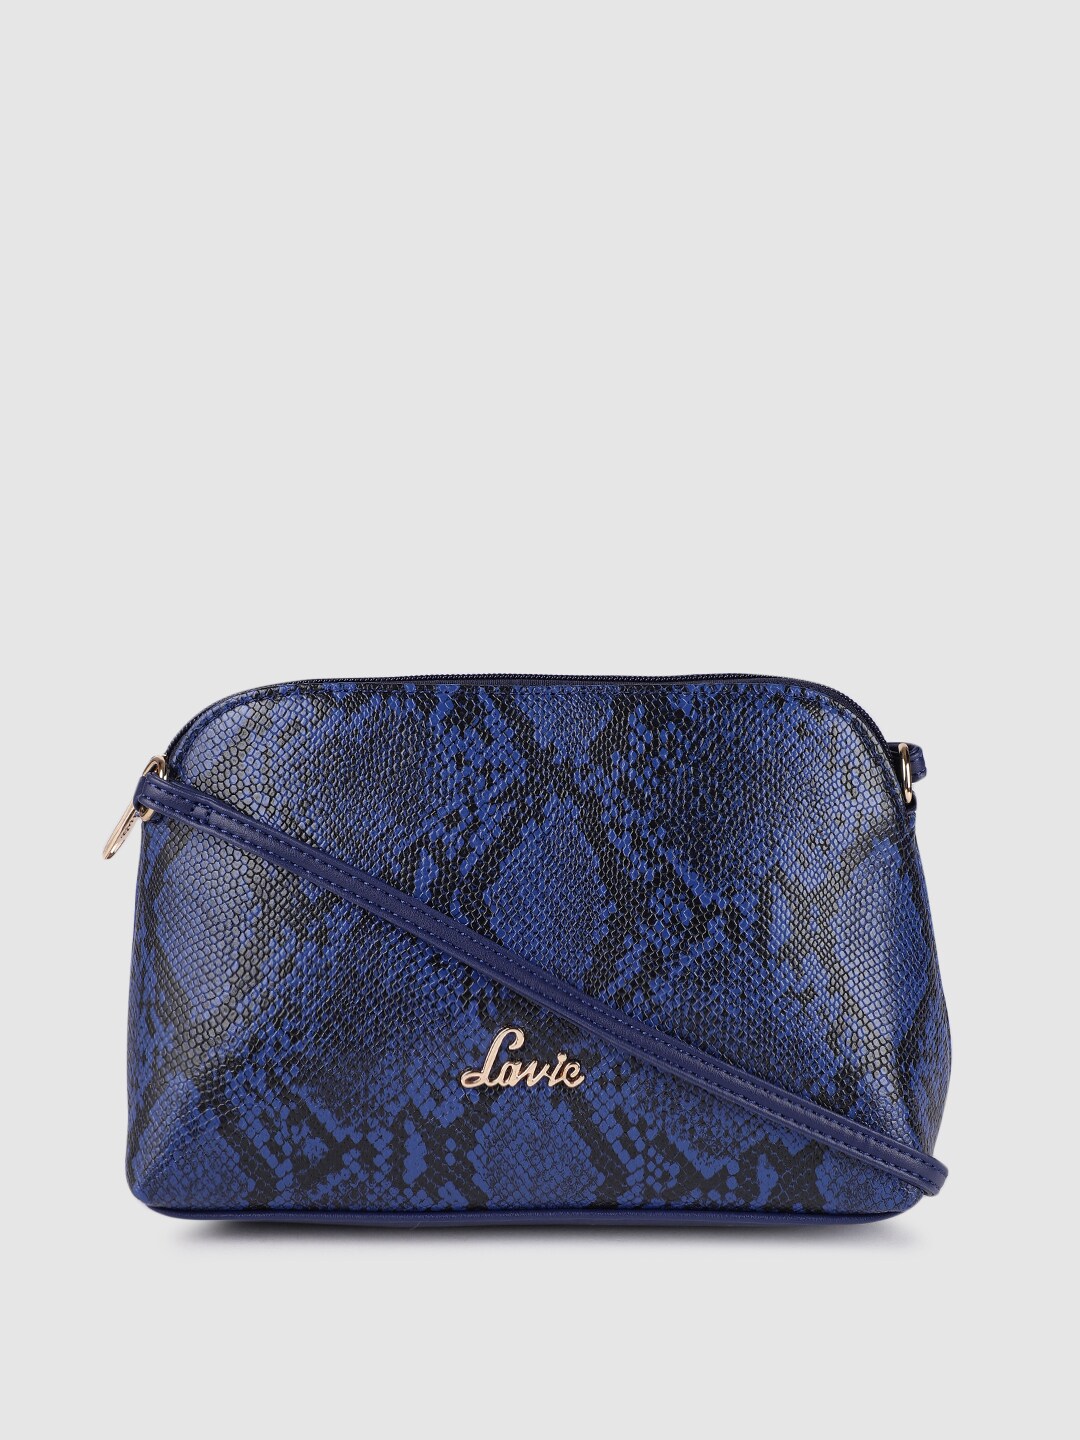 Lavie Blue Textured Structured Sling Bag Price in India